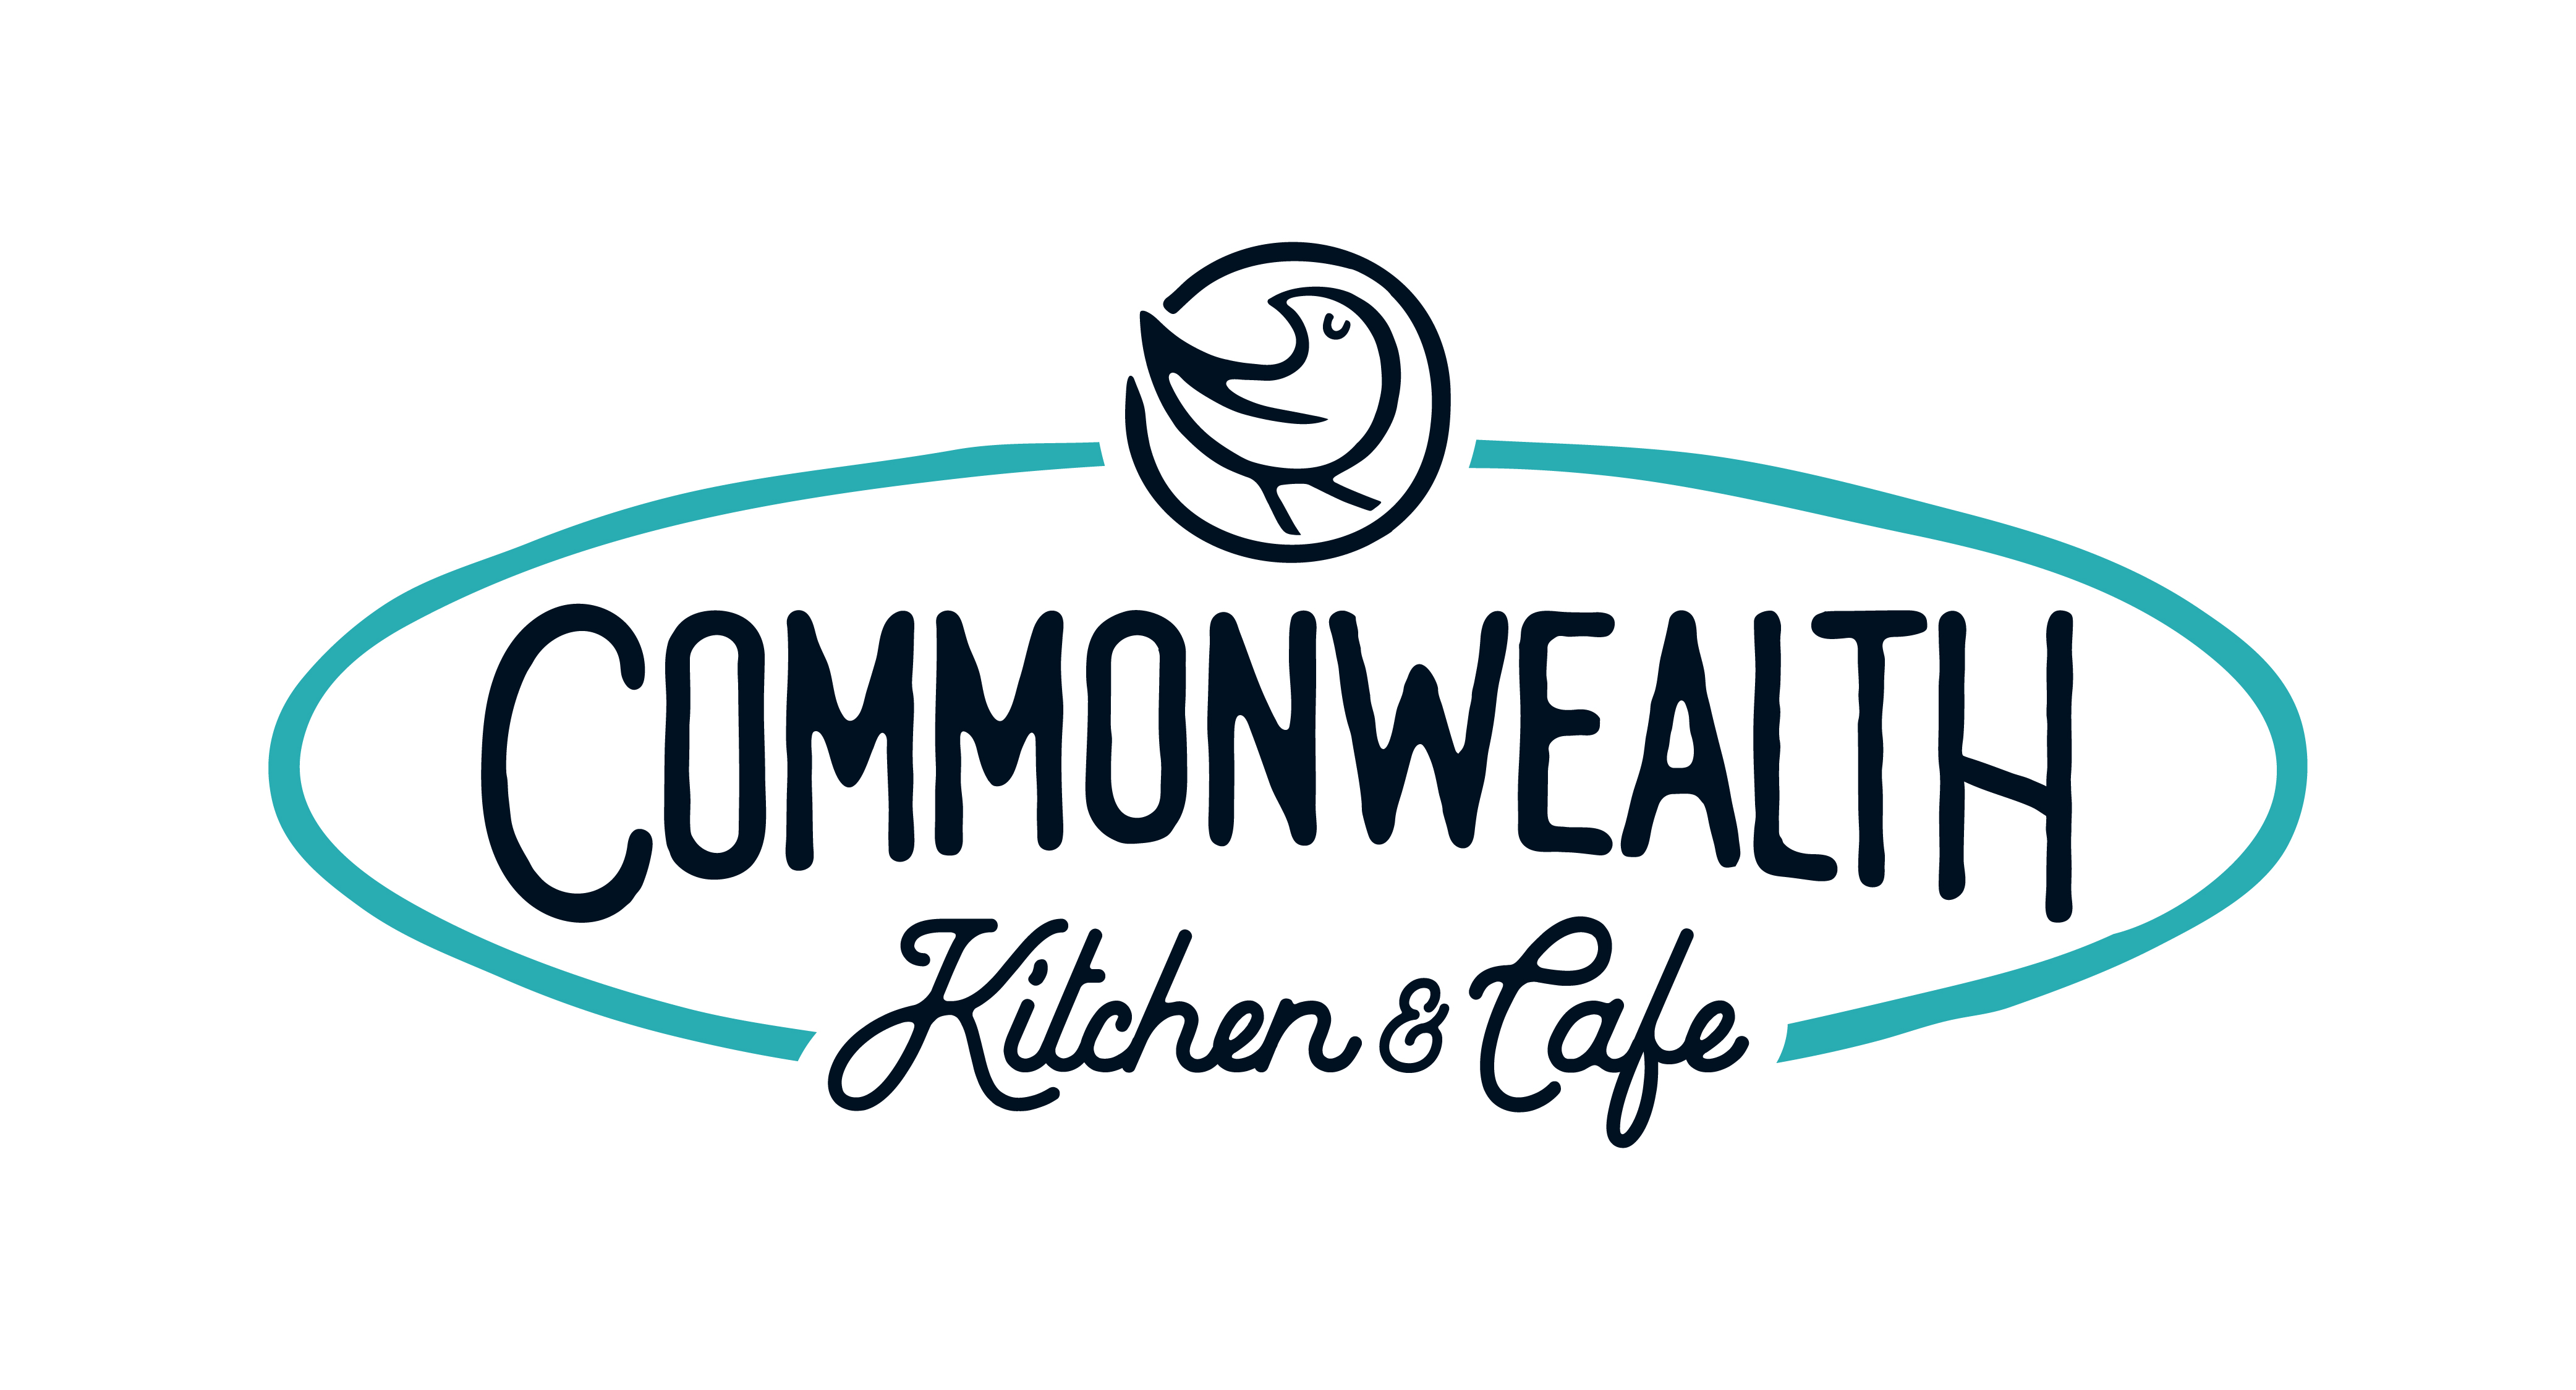 Welcome to CommonwealthKitchen and Cafe!